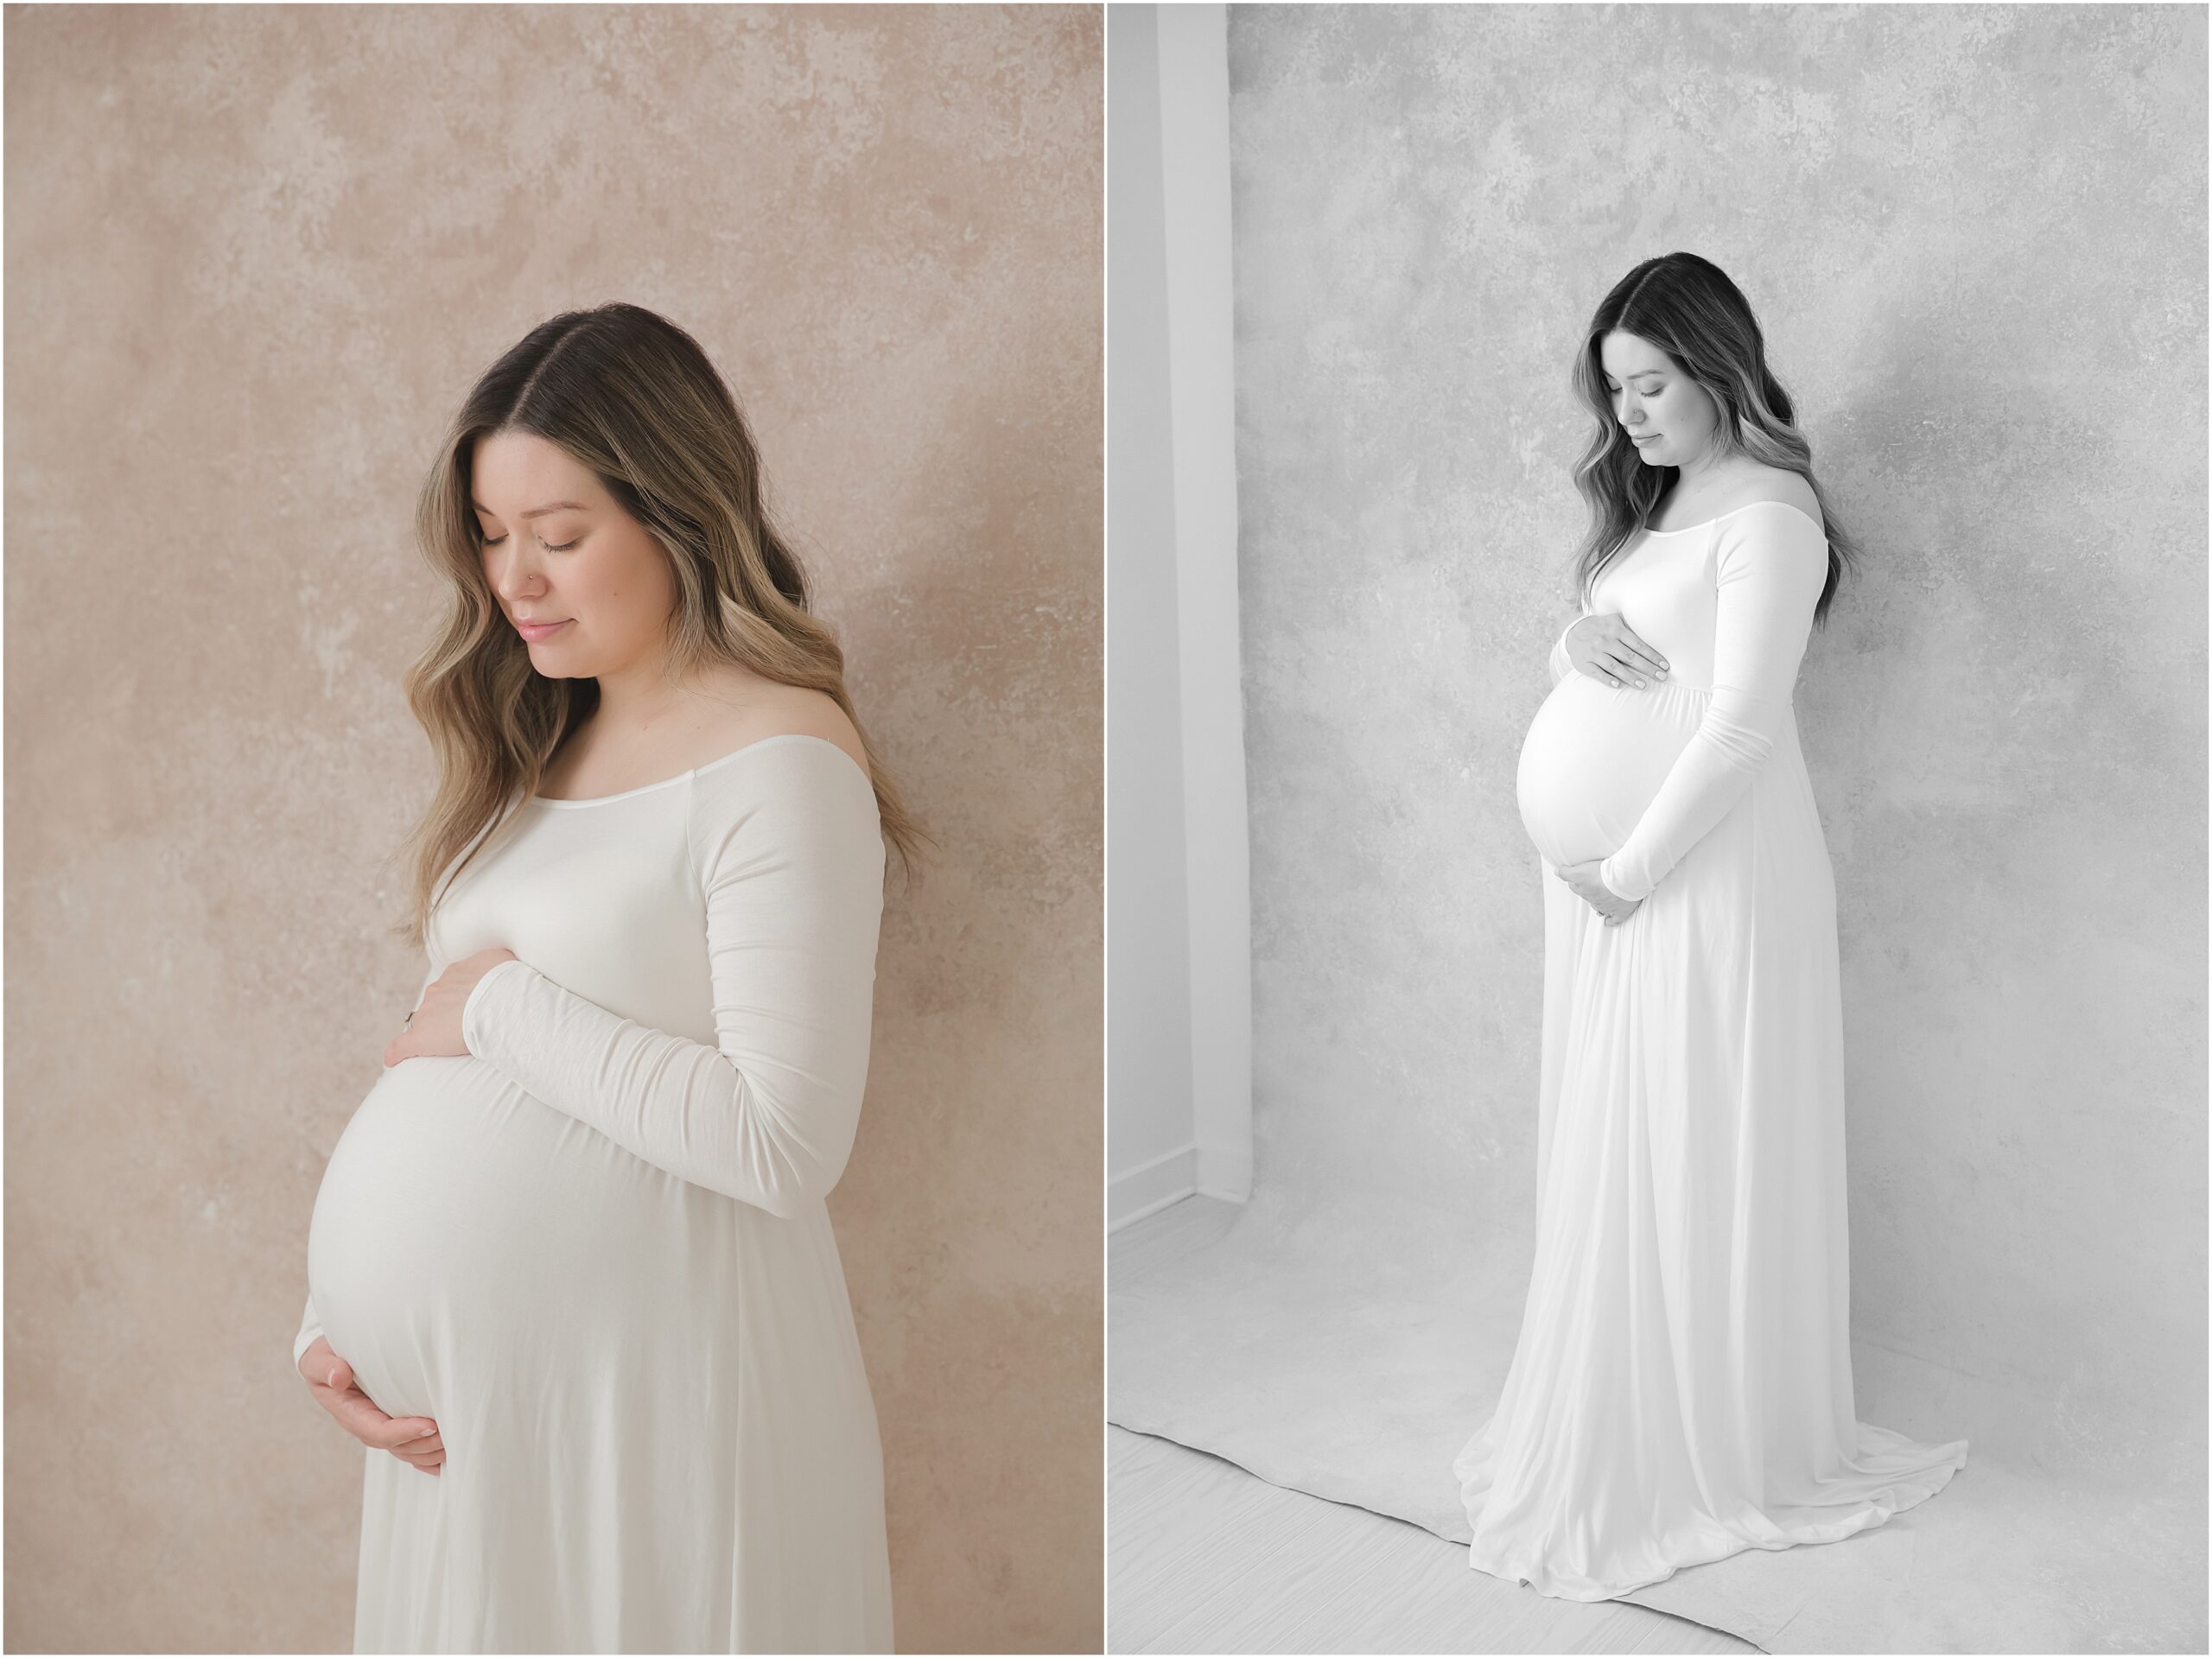 Collage of two photos of a pregnant woman with long hair in a white dress standing on a pink canvas background.